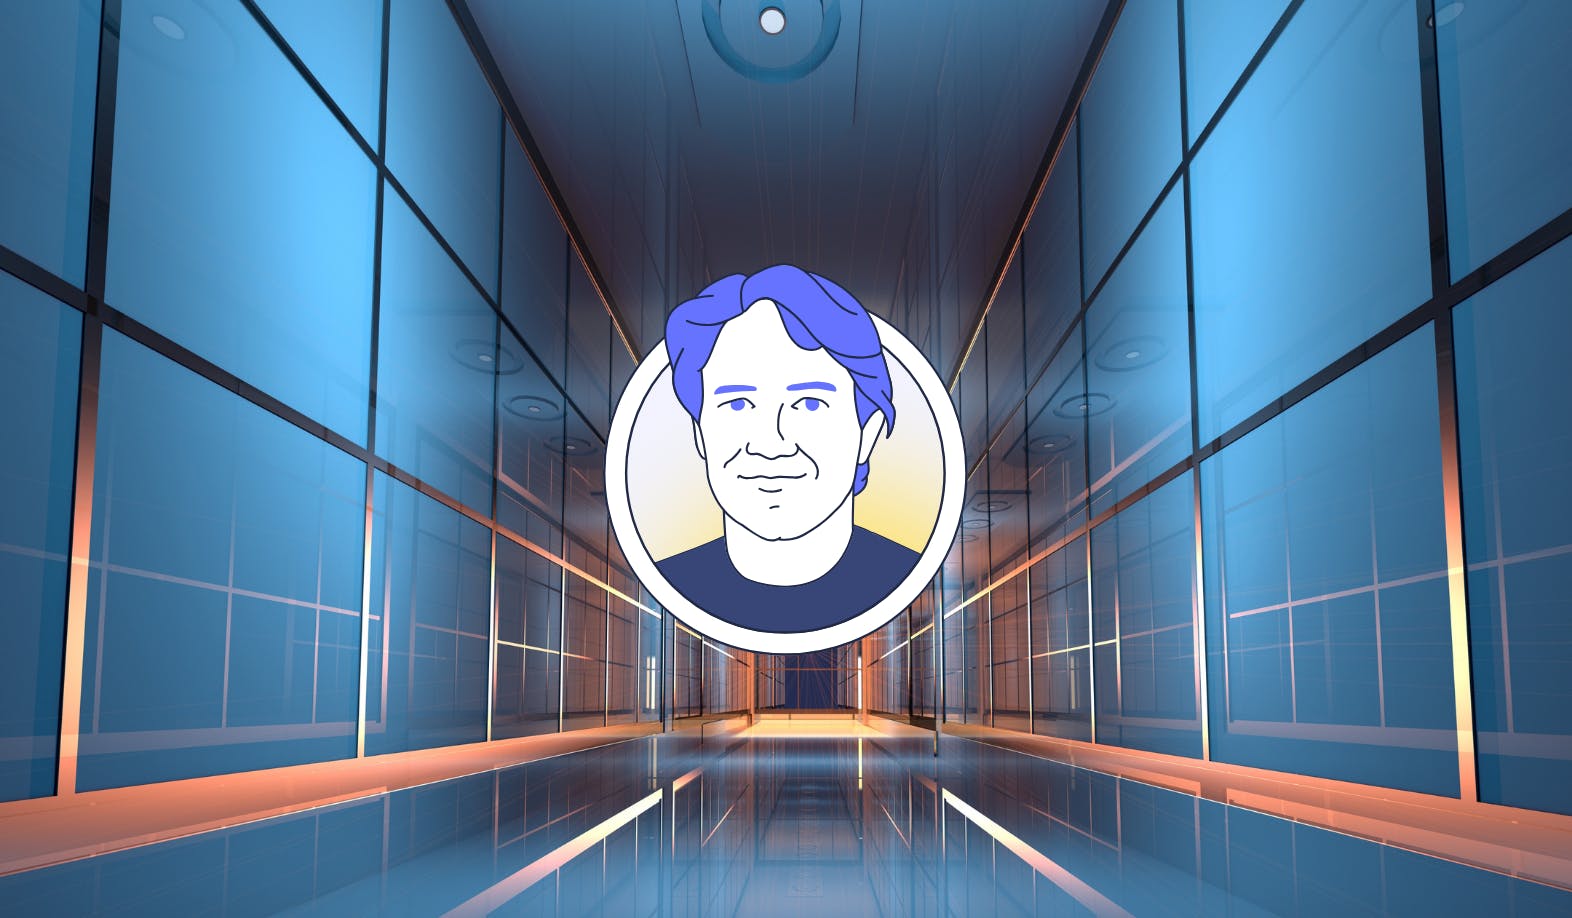 Blog post image of a hallway in an office with a StartMail illustration of StartMail's CEO Robert Beens